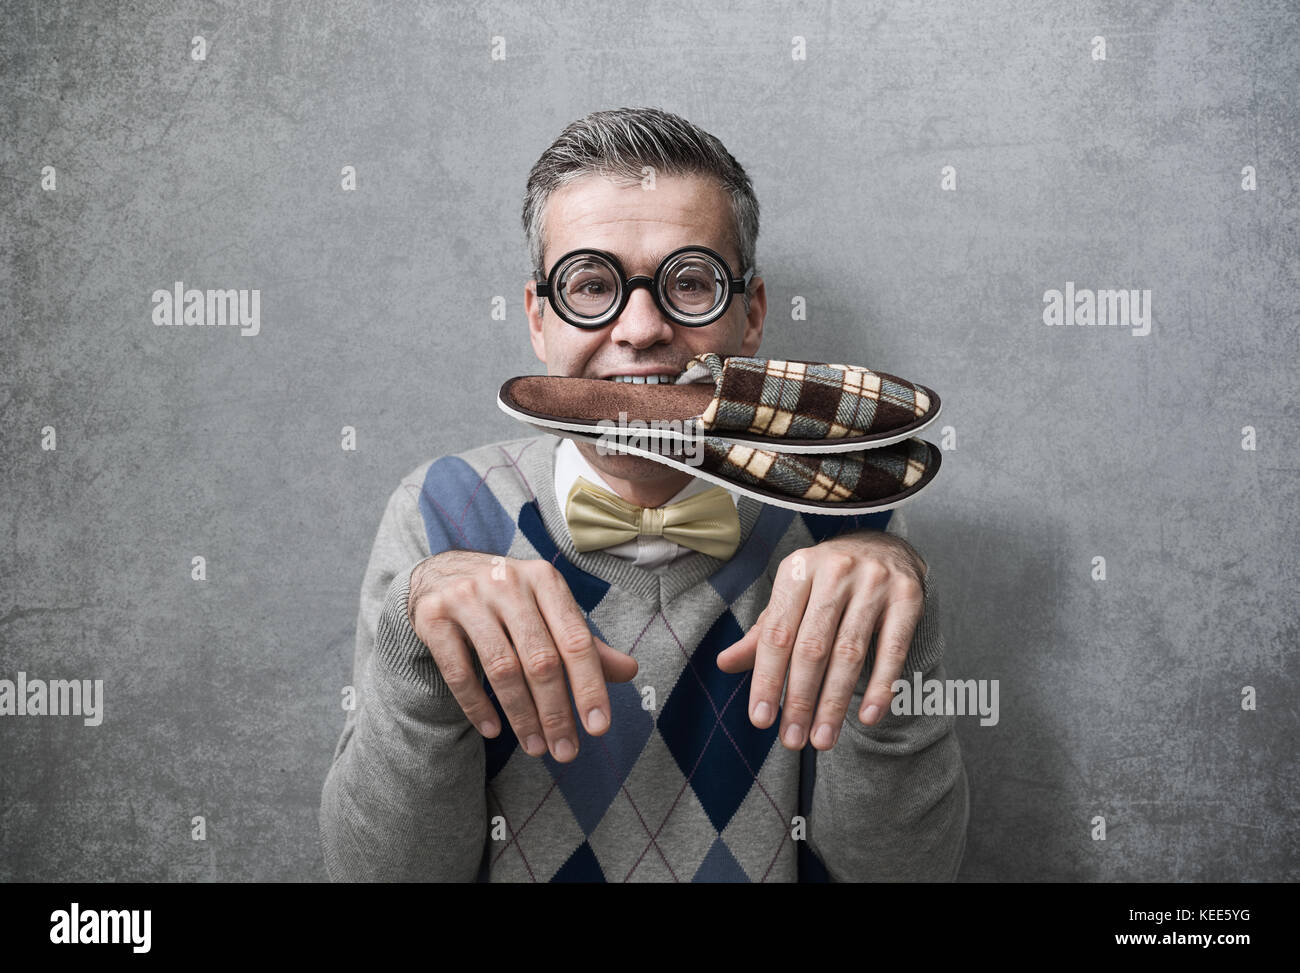 Submissive man acting like a dog and carrying slippers in his mouth, obedience and humiliation concept Stock Photo